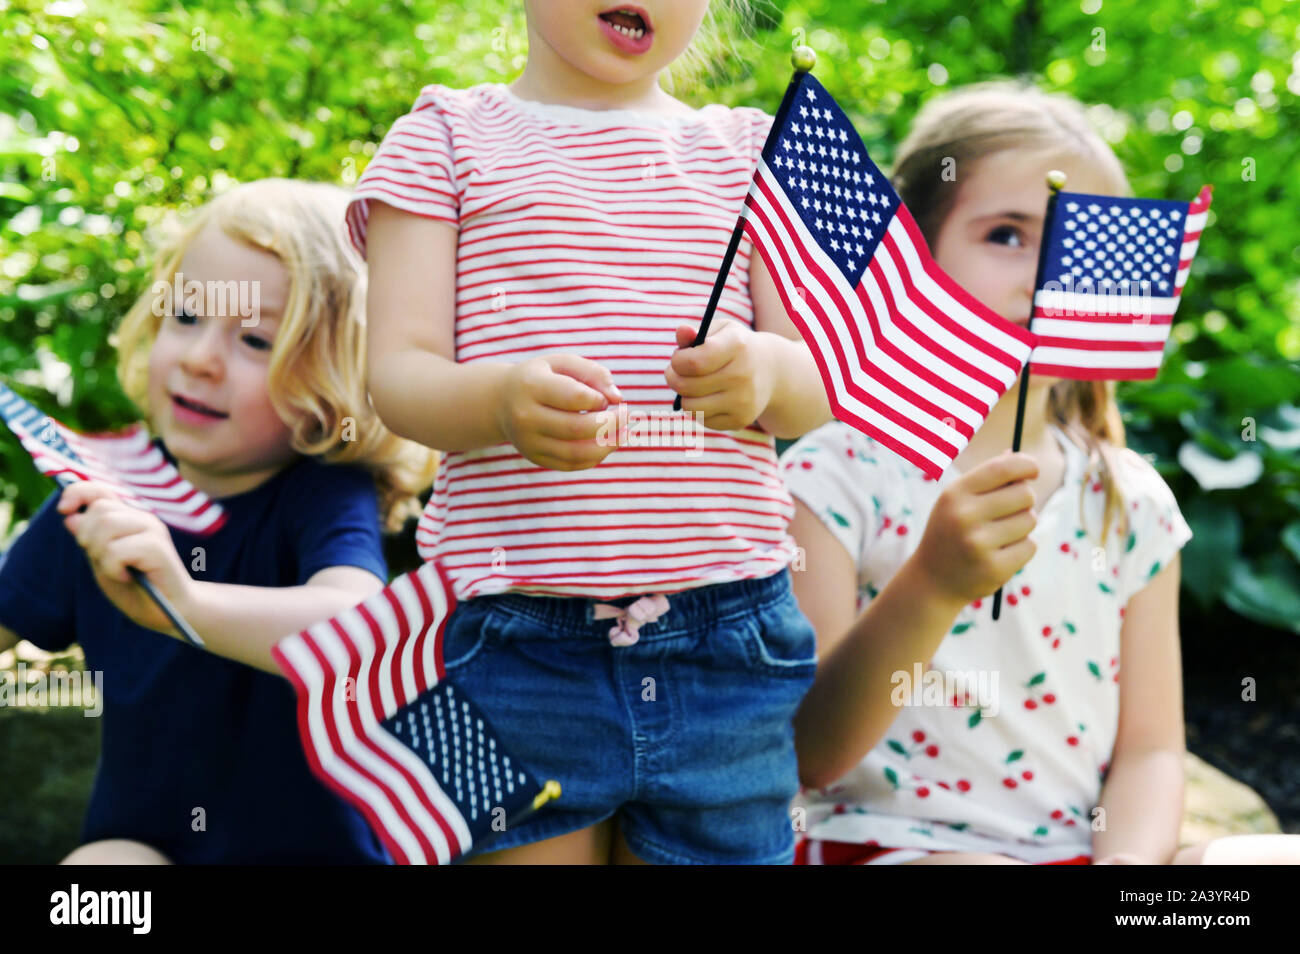 Children holding American flags Stock Photo